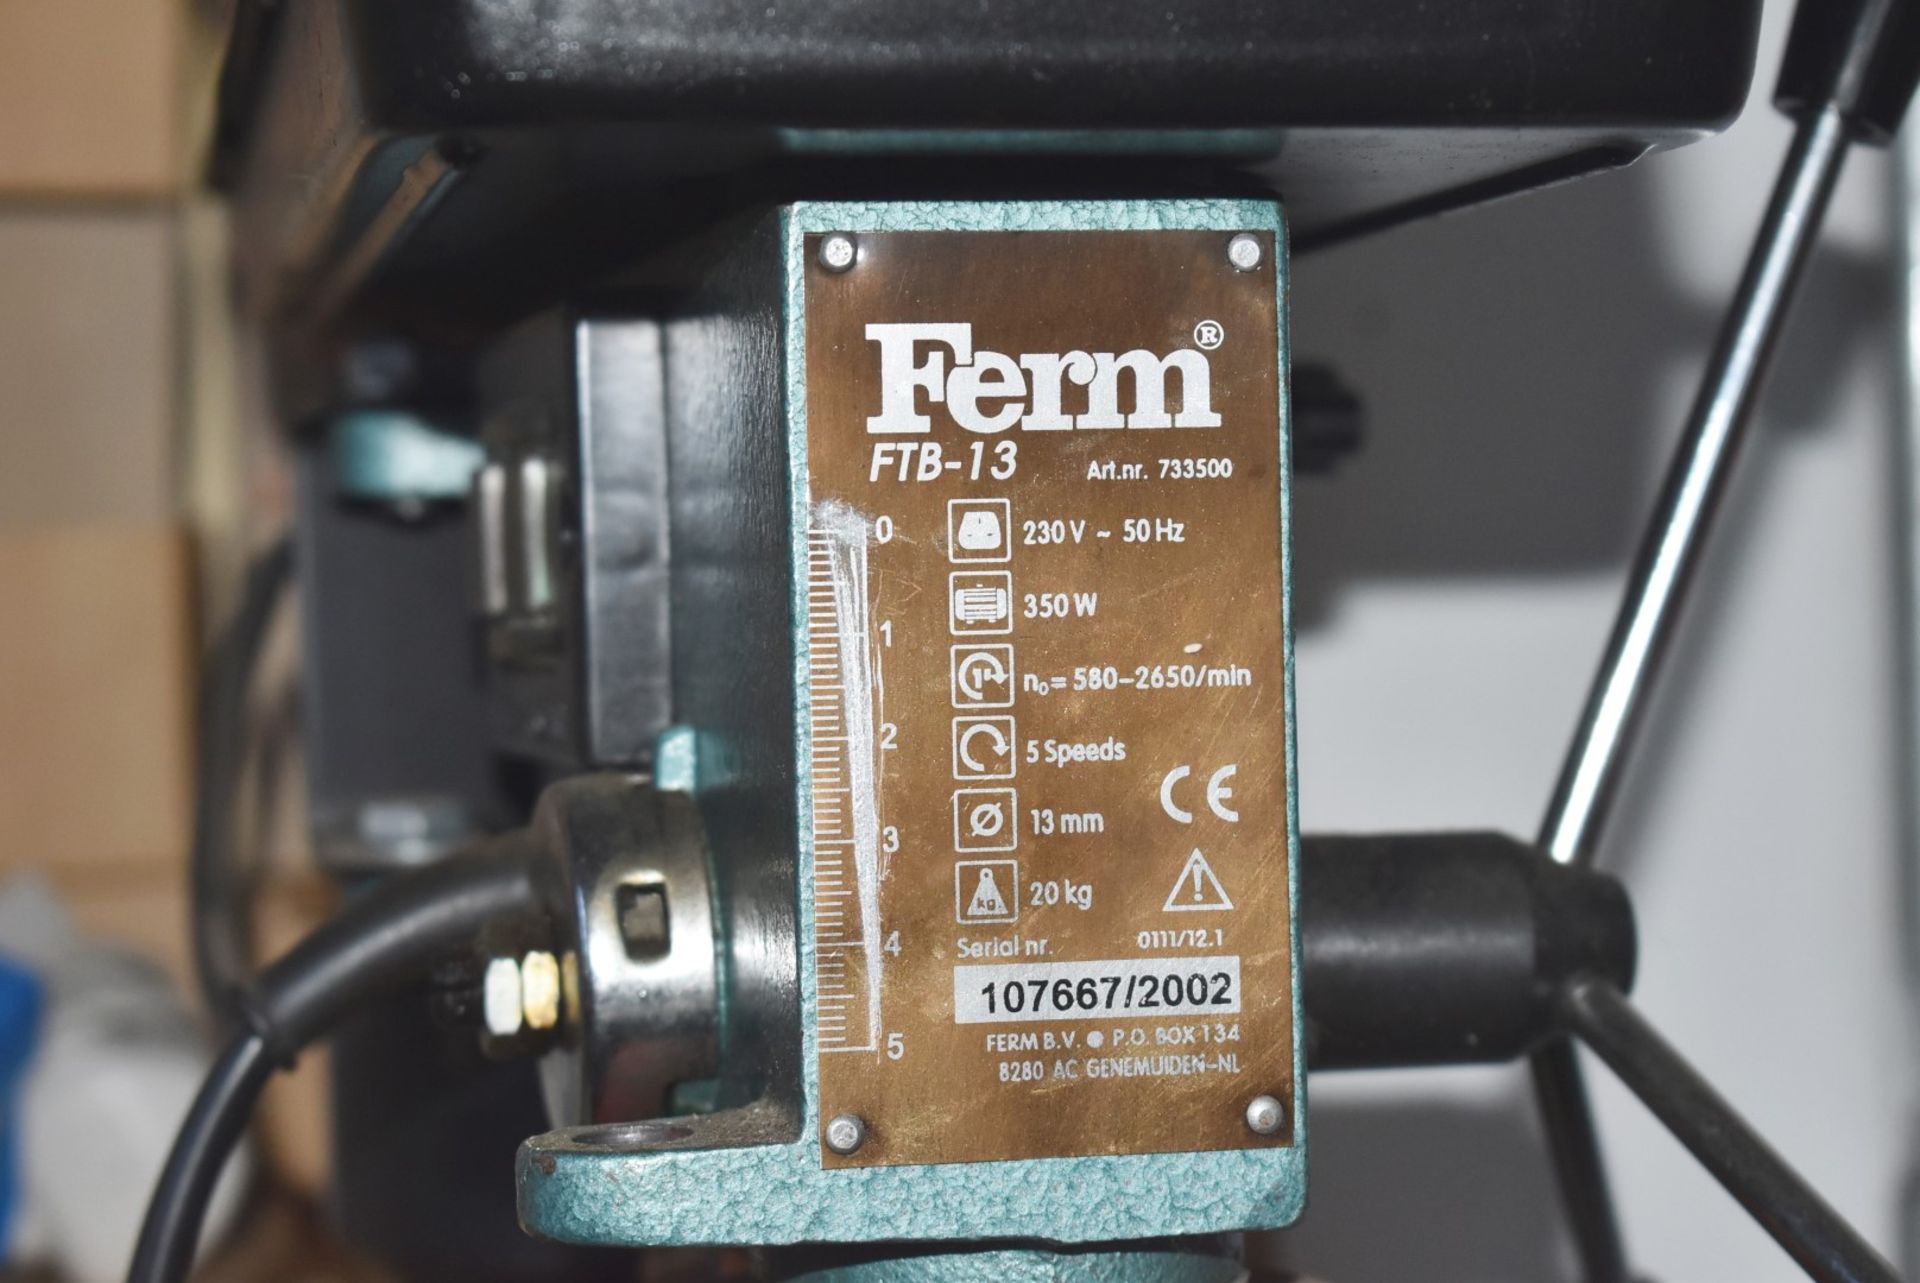 1 x Ferm FTB-13 Bench Mounted Pillar Drill - 5 Speed, 230v, 350w - Model Number 733500 - Image 2 of 5